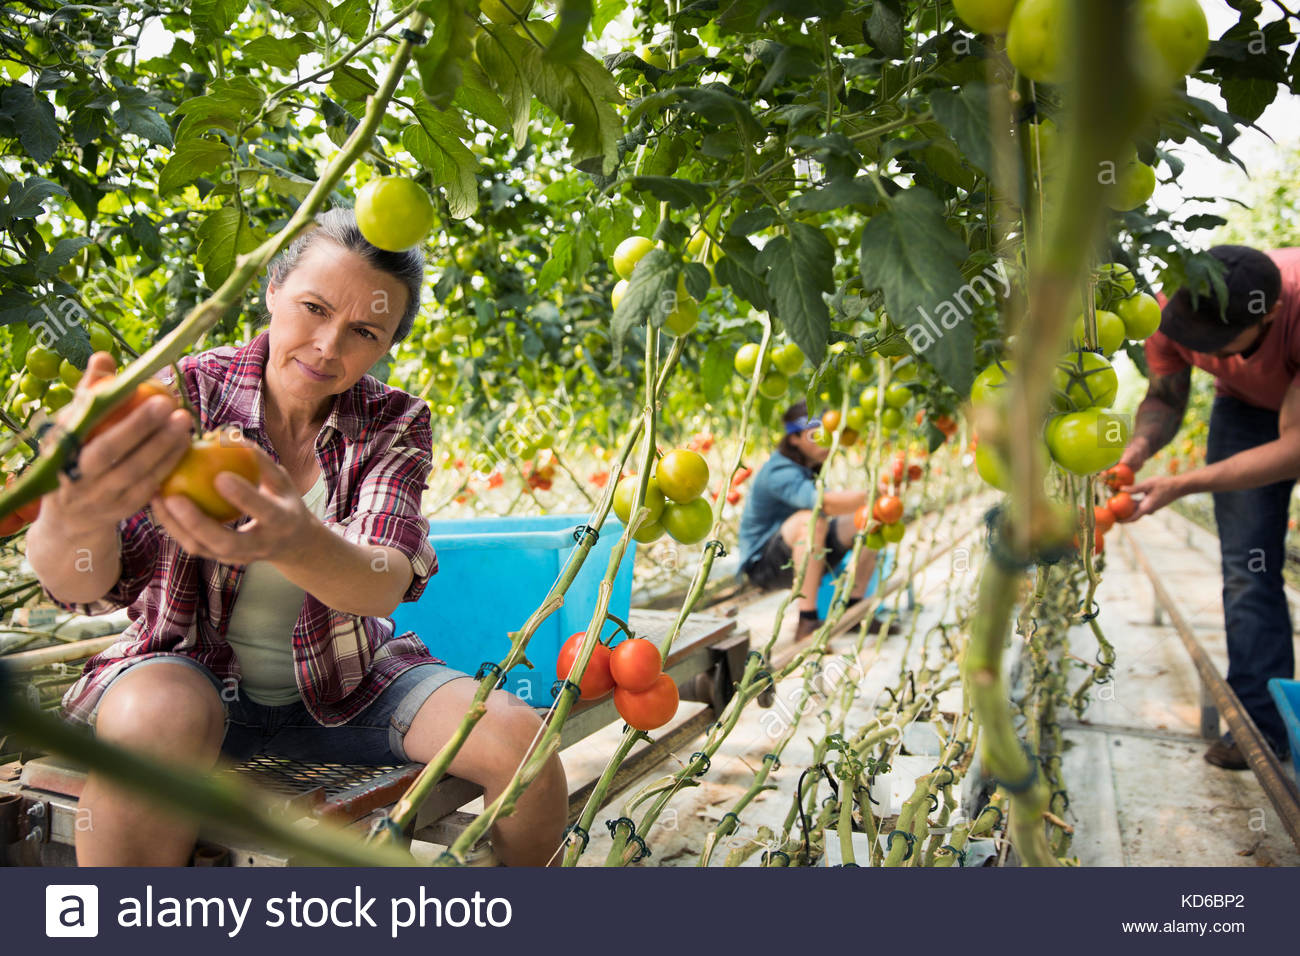 Woman inspecting tomatoes growing on tomato plants in greenhouse Stock Photo